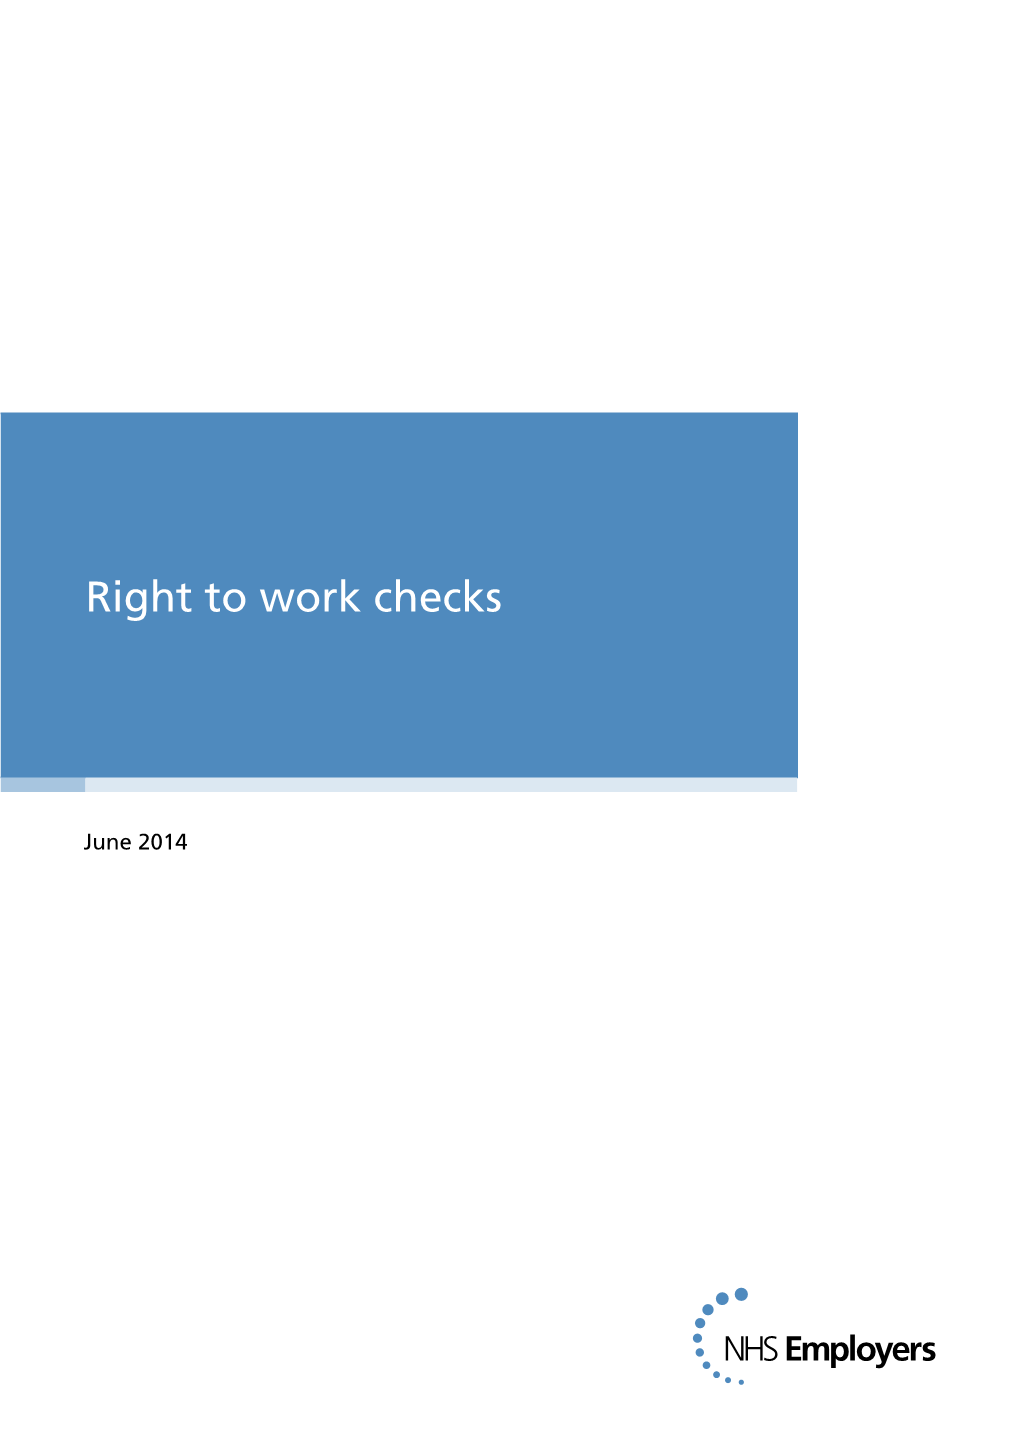 Right to Work Checks